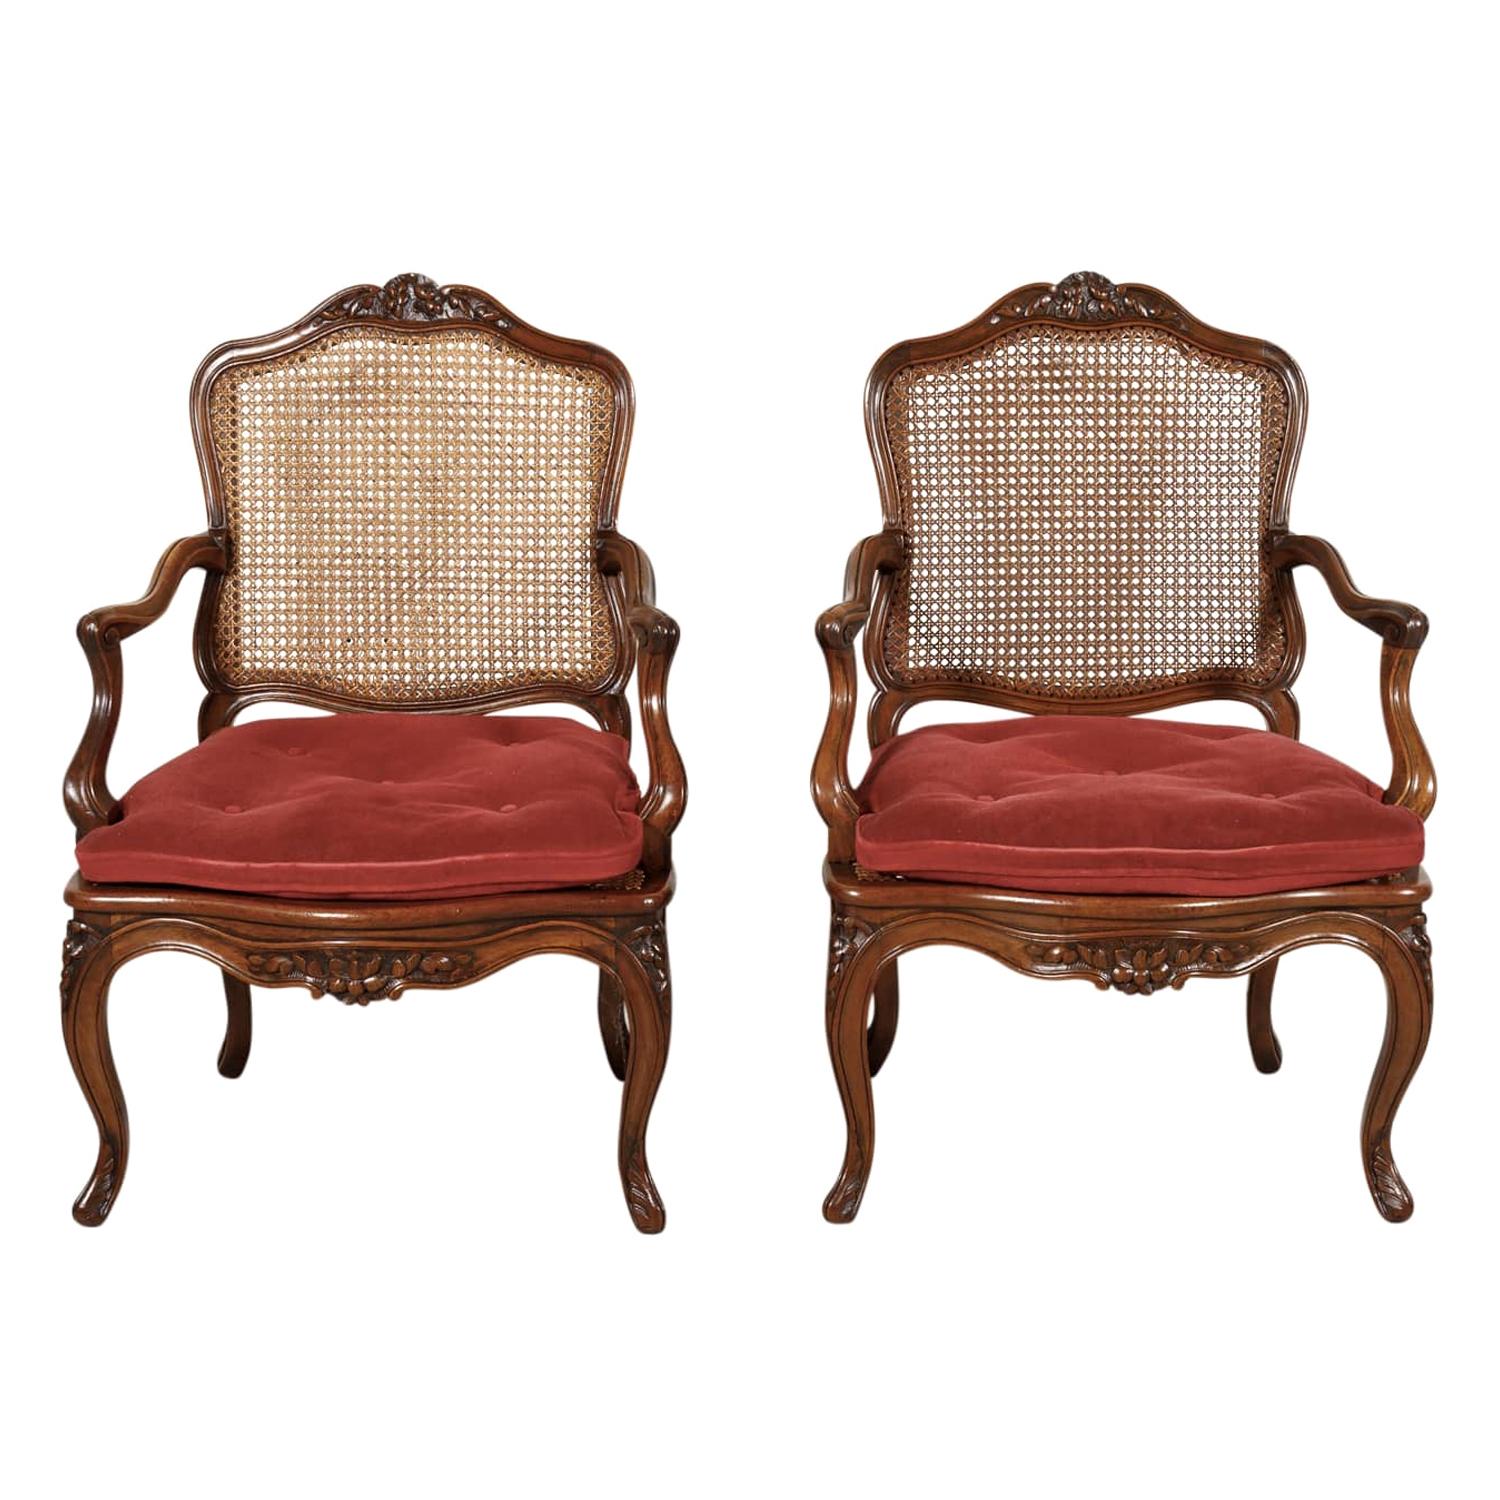 Pair of 19th Century Country French Louis XV Style Walnut and Cane Armchairs